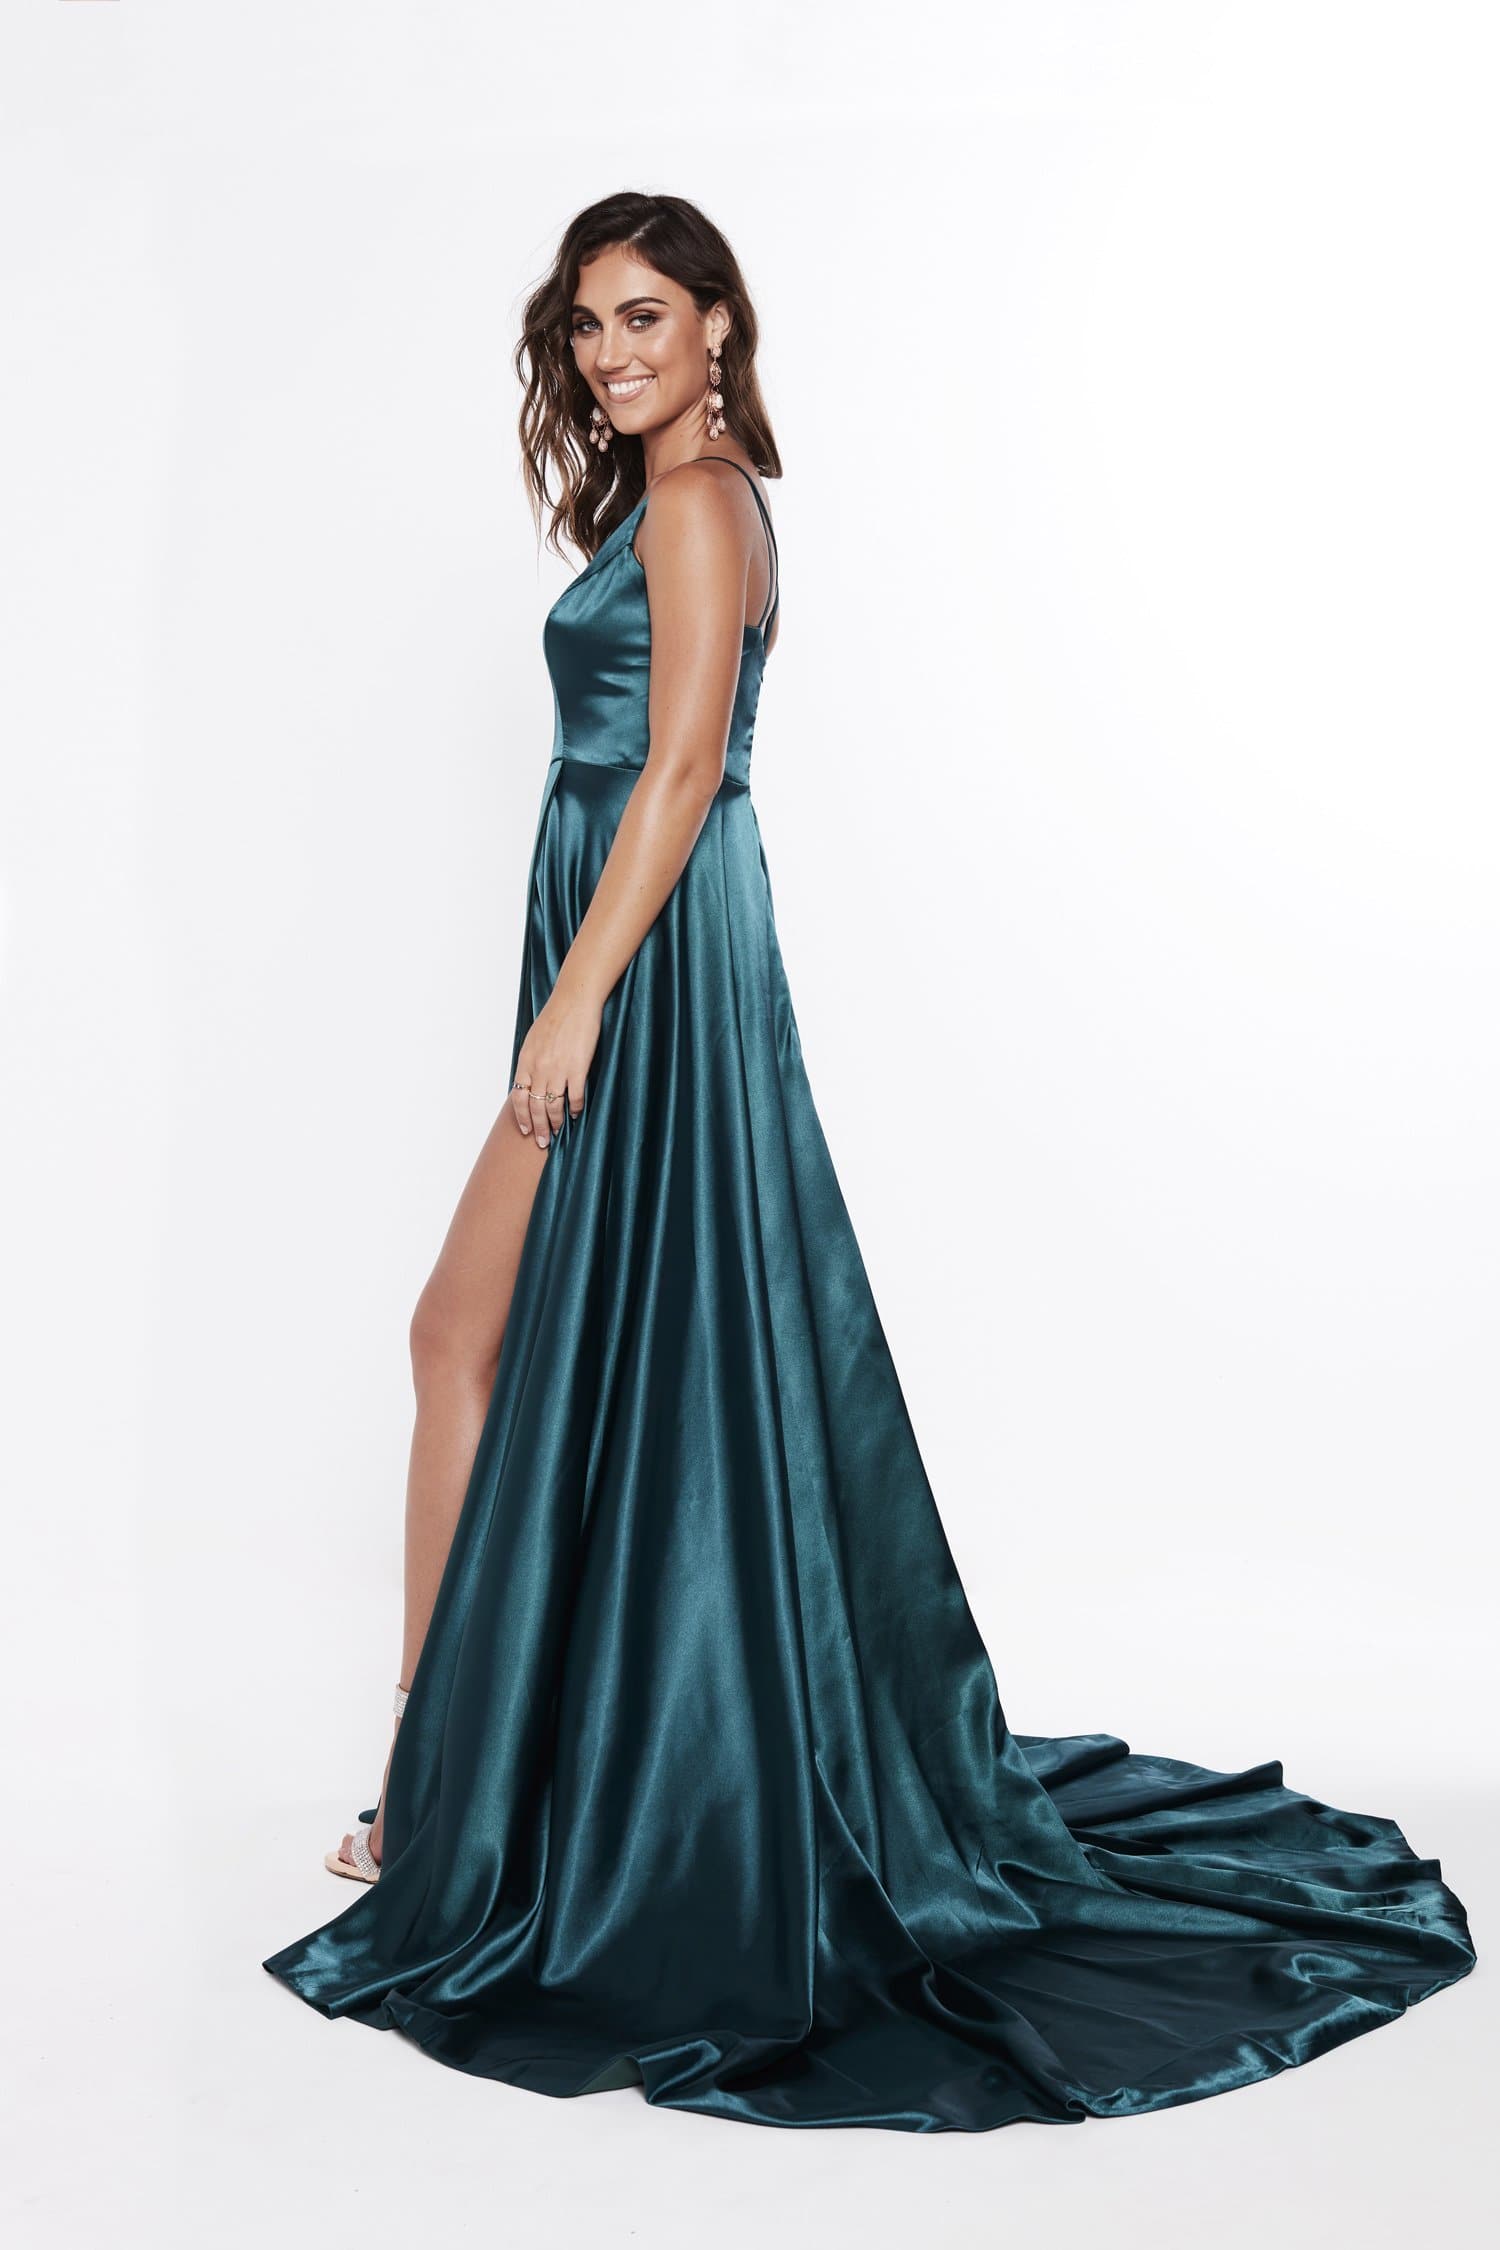 A&N Luxe Lucia Satin Gown - Teal